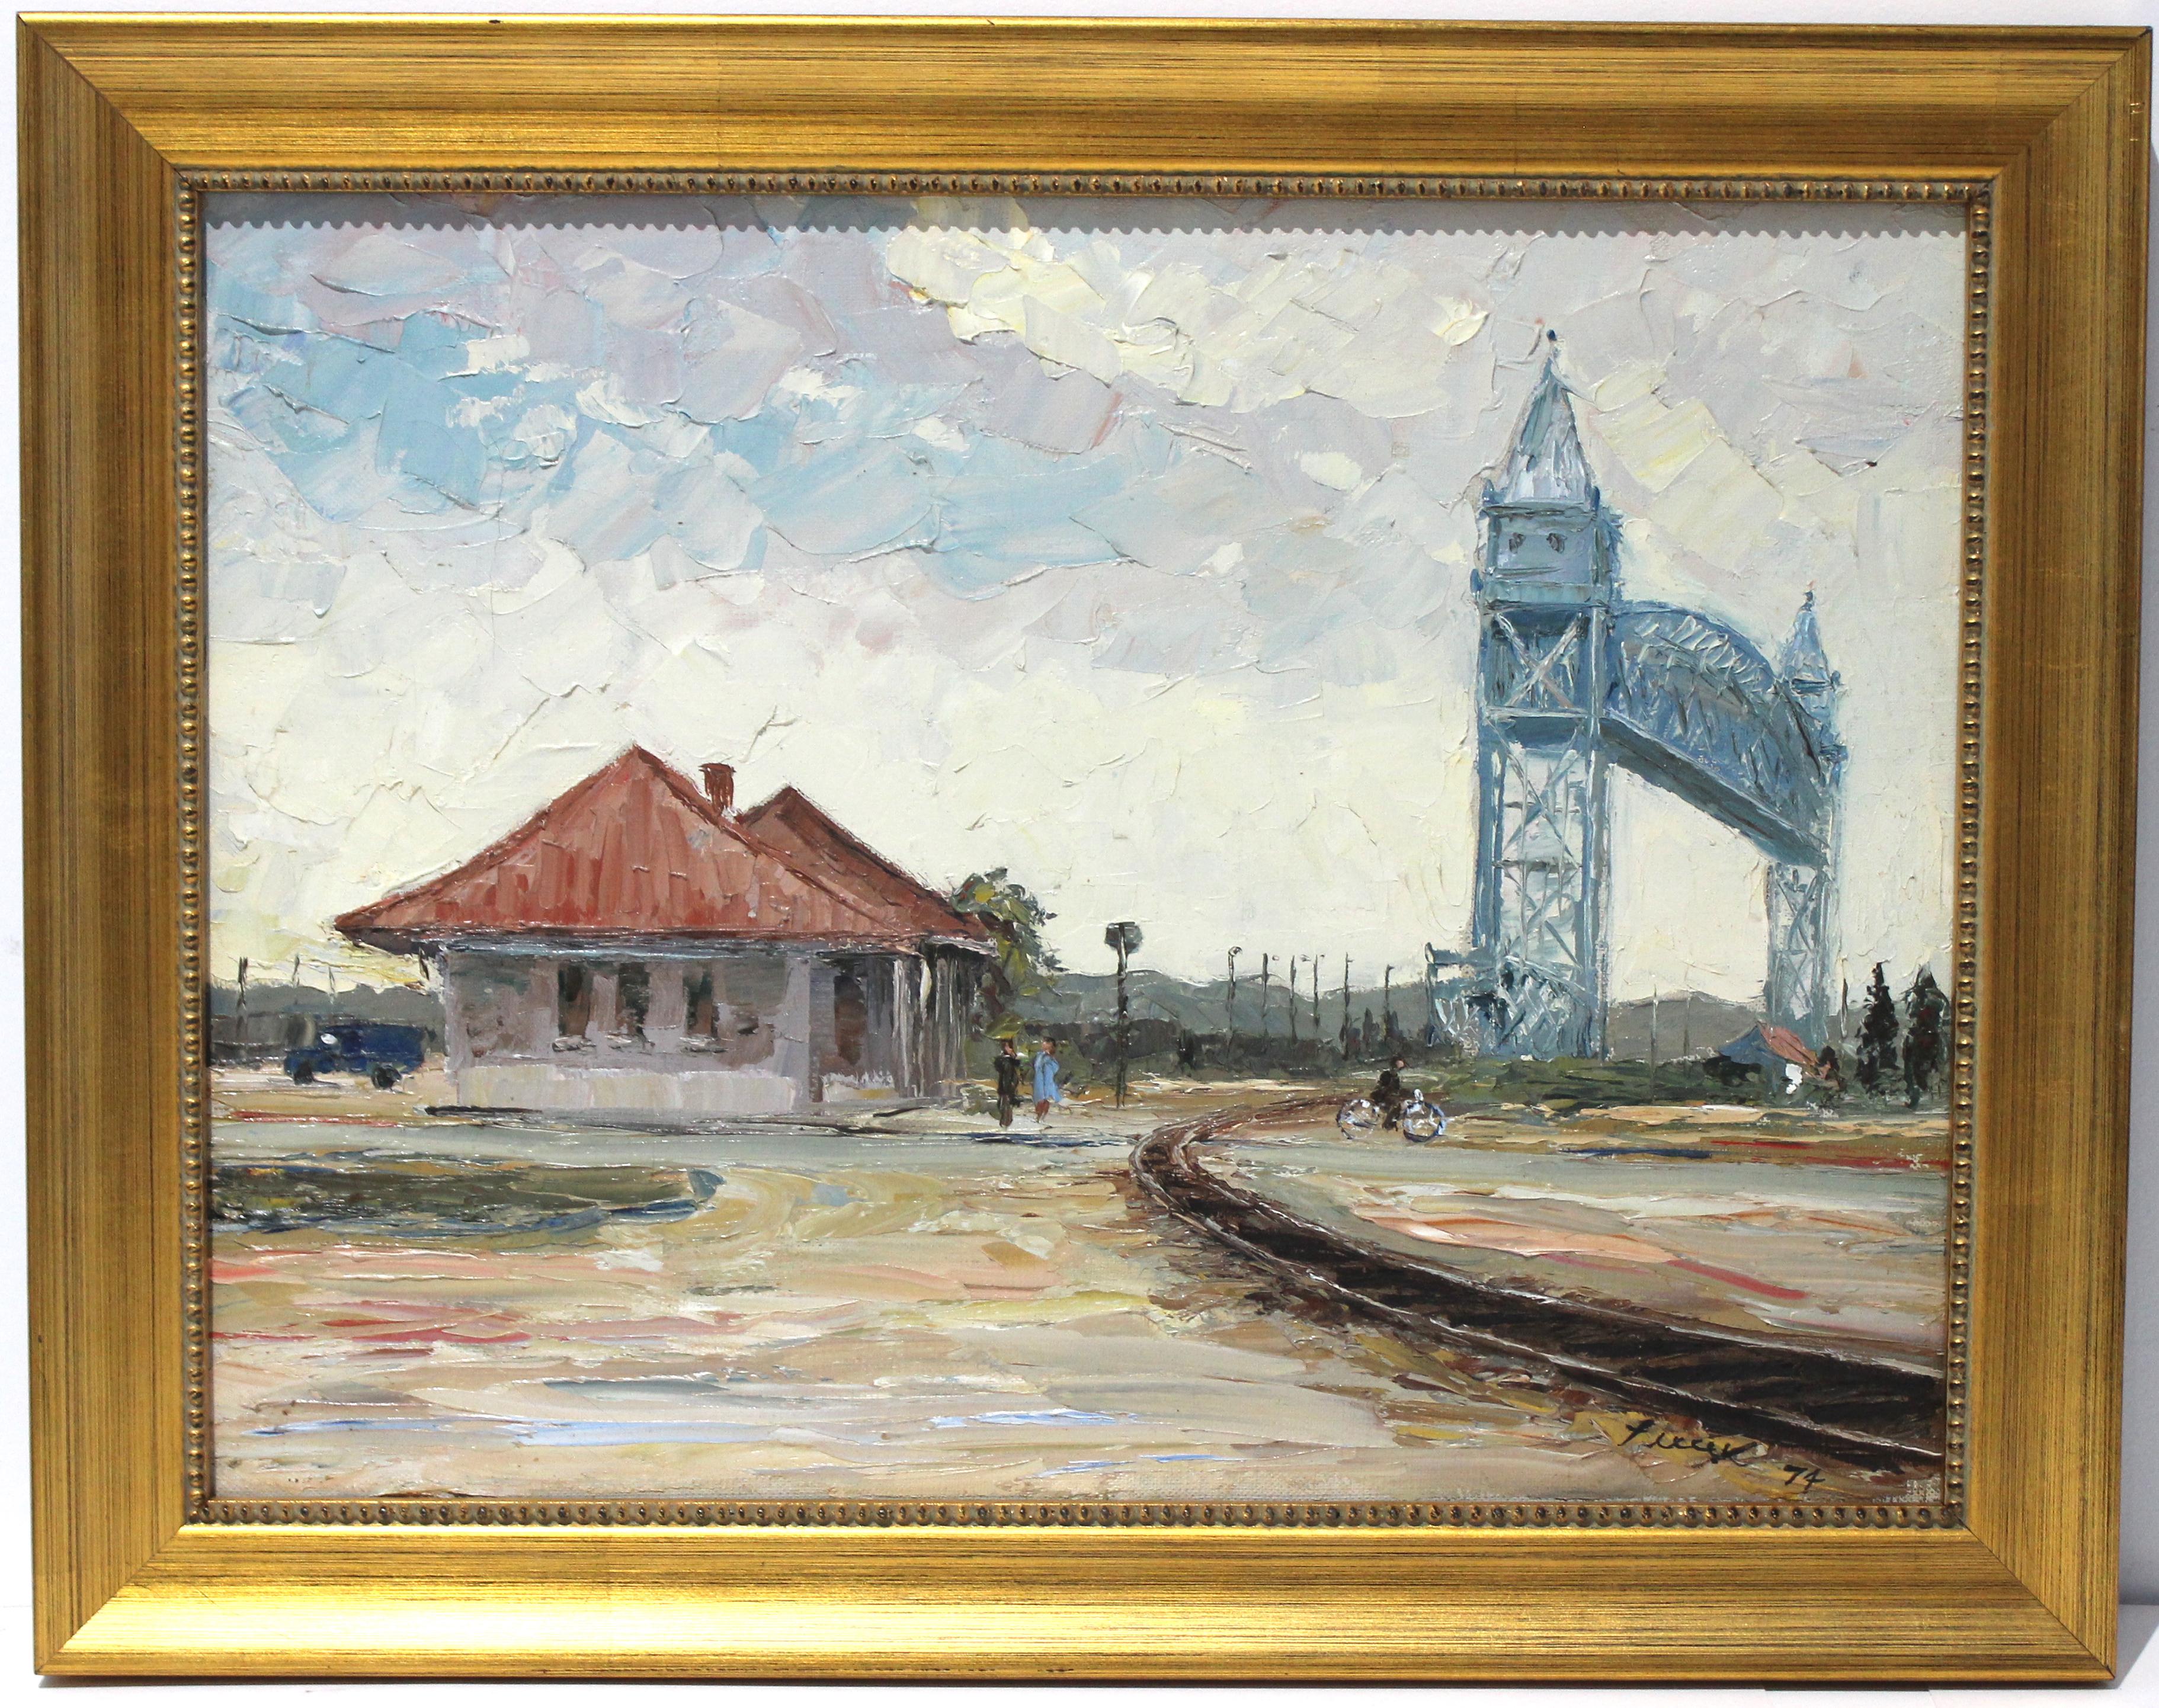 Fine example of plein aire oil painting on linen canvas using the palette knife technique (that is, no brushes were used). Signed and dated 1974 and noted in verso on the stretcher Buzzards Bay Railroad Station Cape Cod Mass 1974

Size framed 18